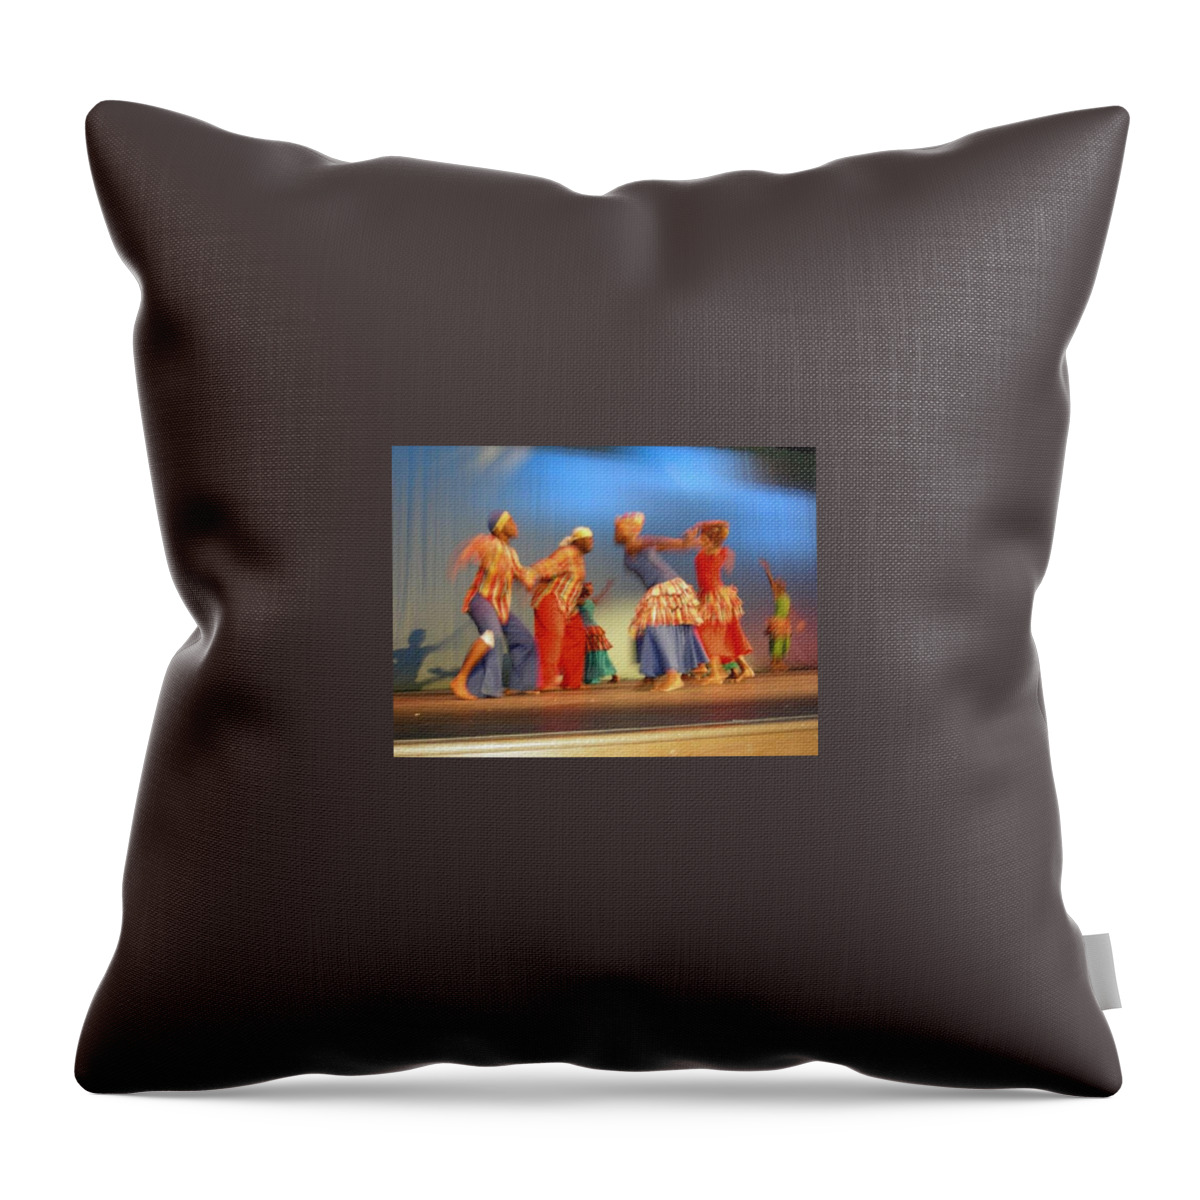 Jankoonuu Throw Pillow featuring the painting Jamboree 2 by Trevor A Smith